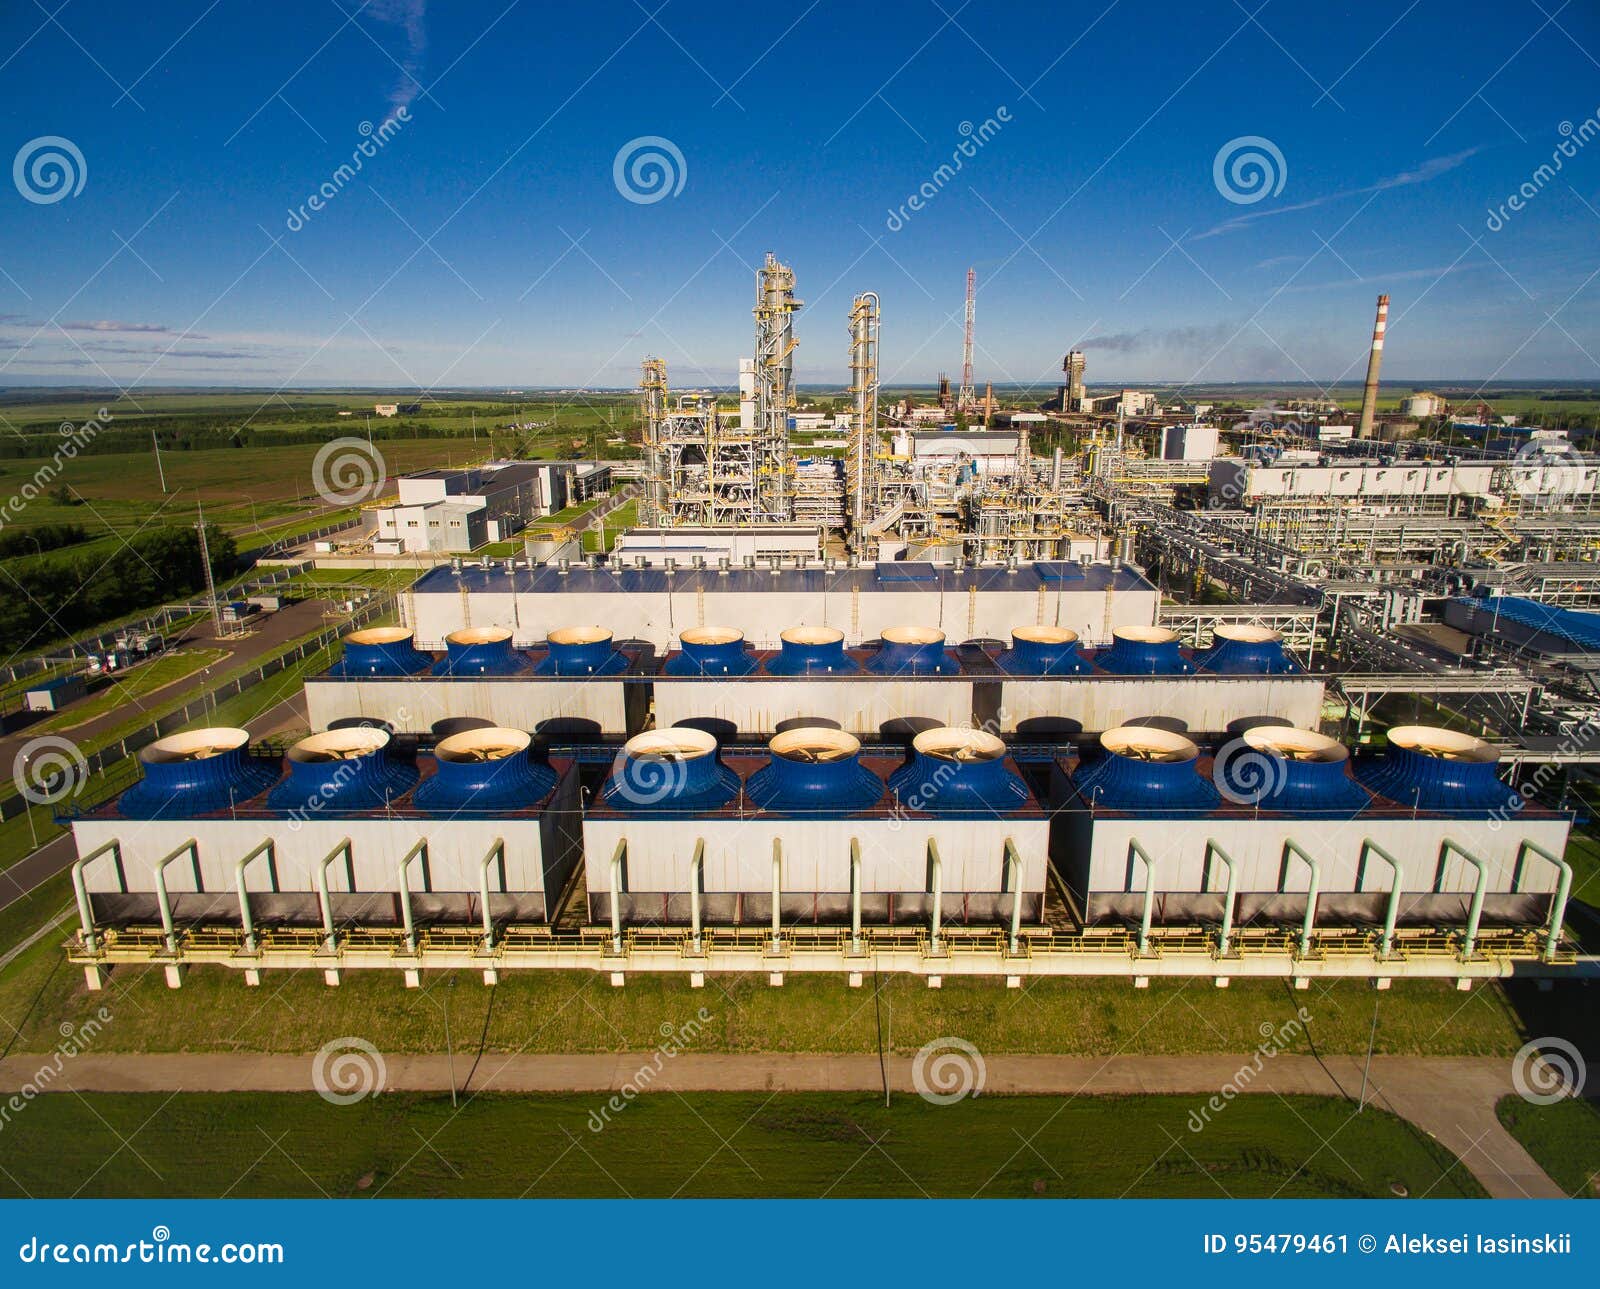 The cooling fans and units for nitric acid production on fertilizer plant. Aerial view